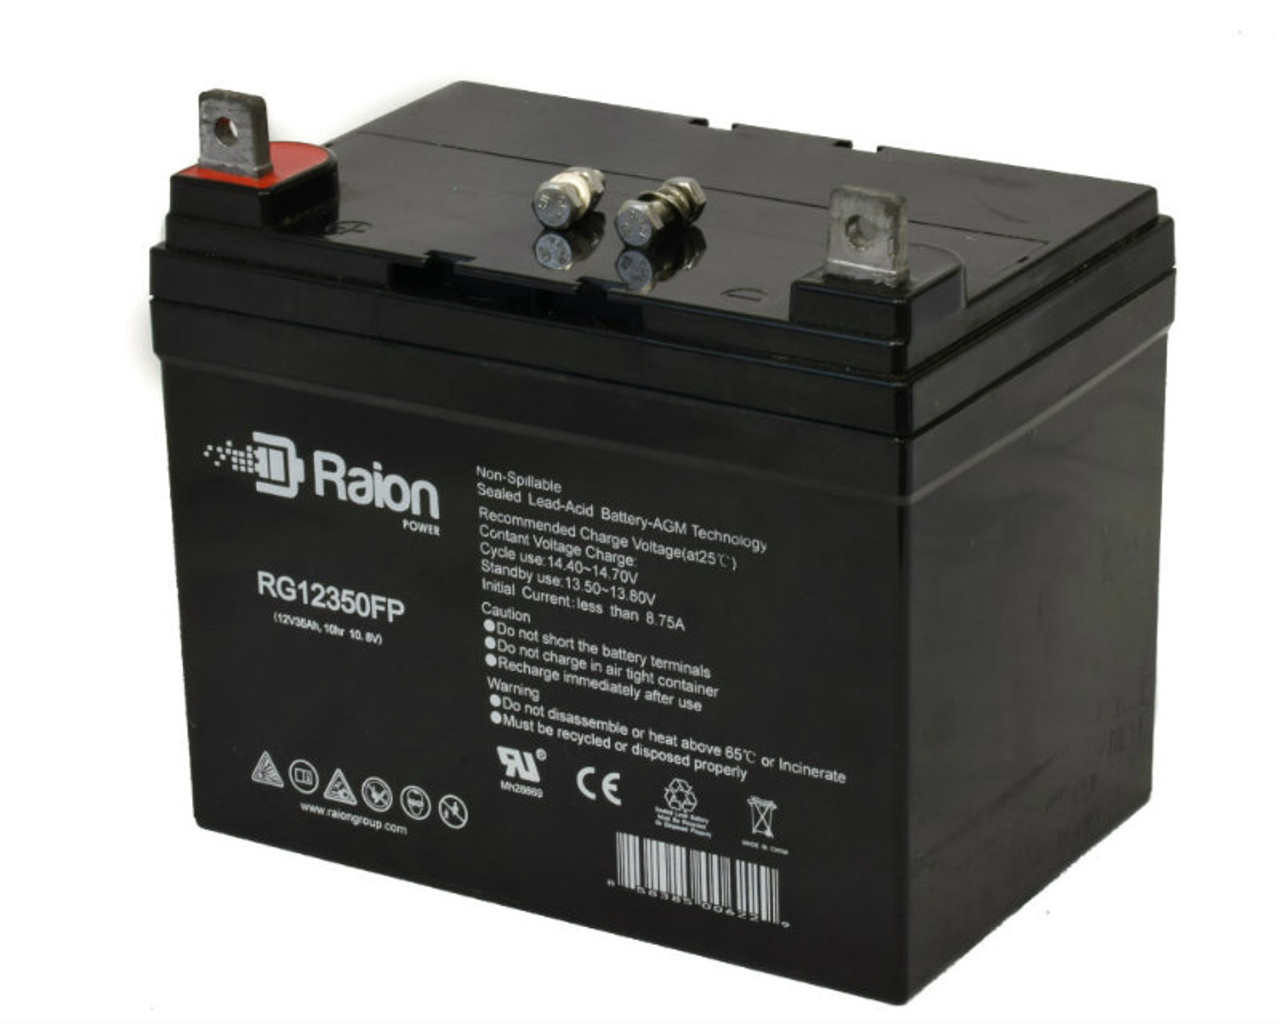 Raion Power Replacement 12V 35Ah RG12350FP Battery for TPE TPE12-33